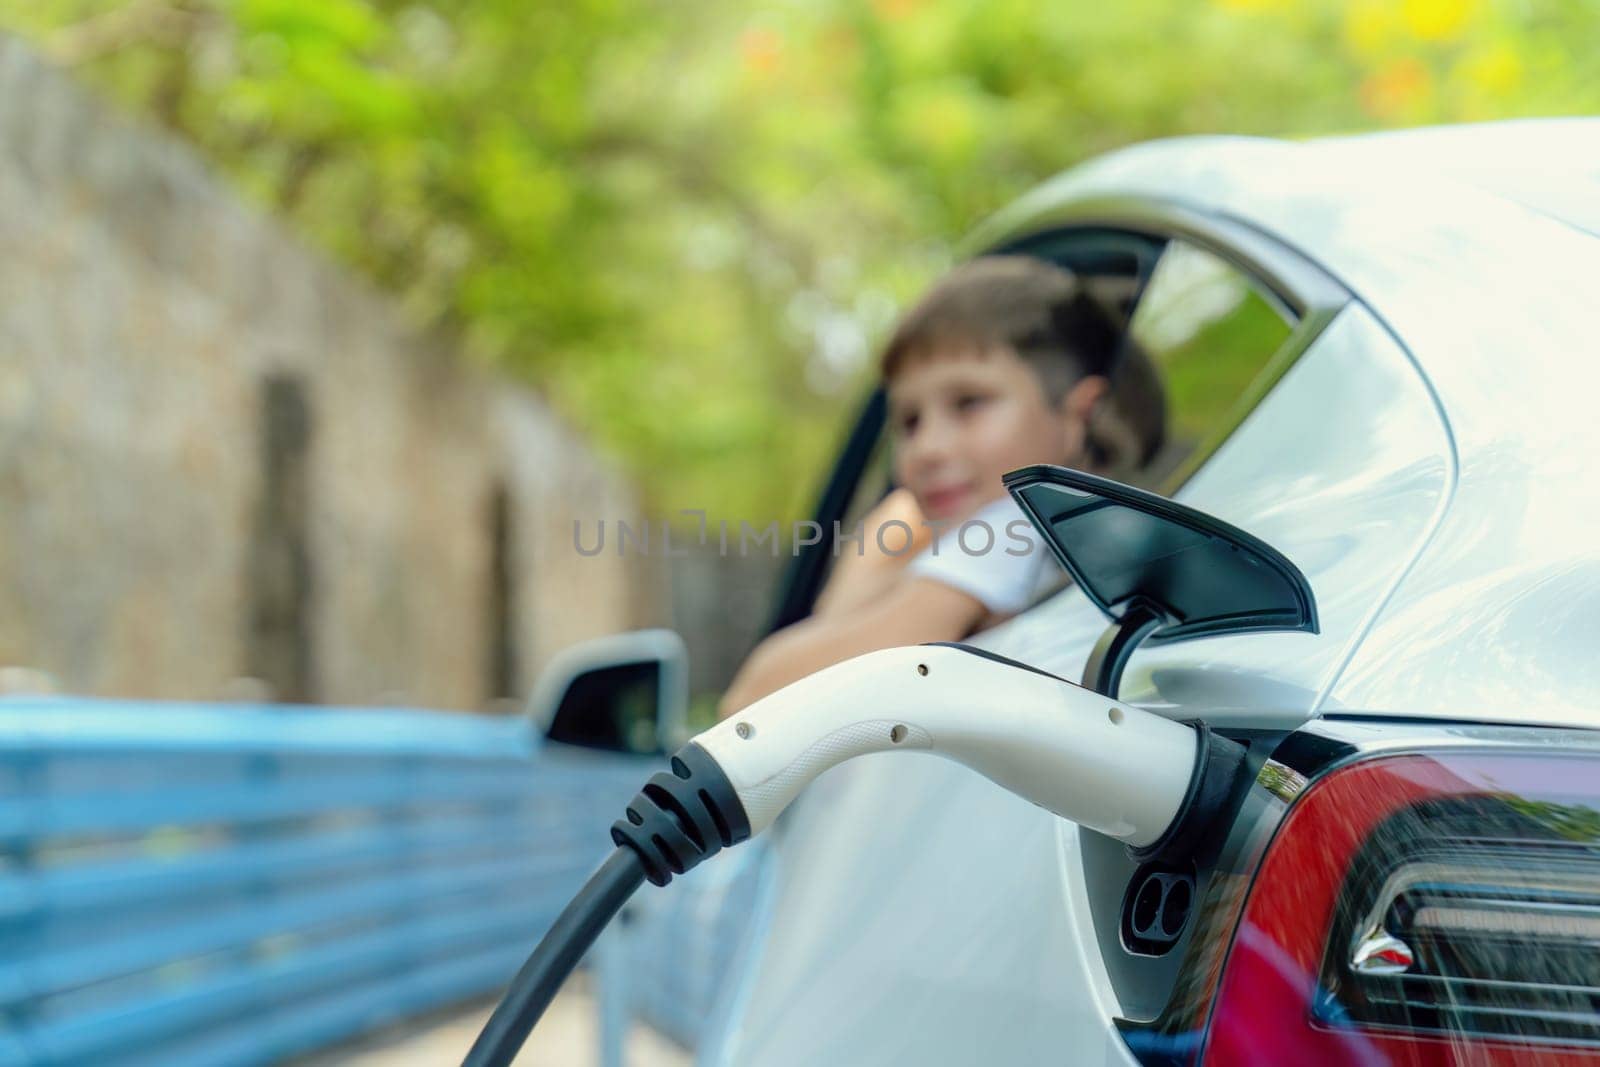 EV car recharge battery from EV charging station with blur boy, Perpetual by biancoblue